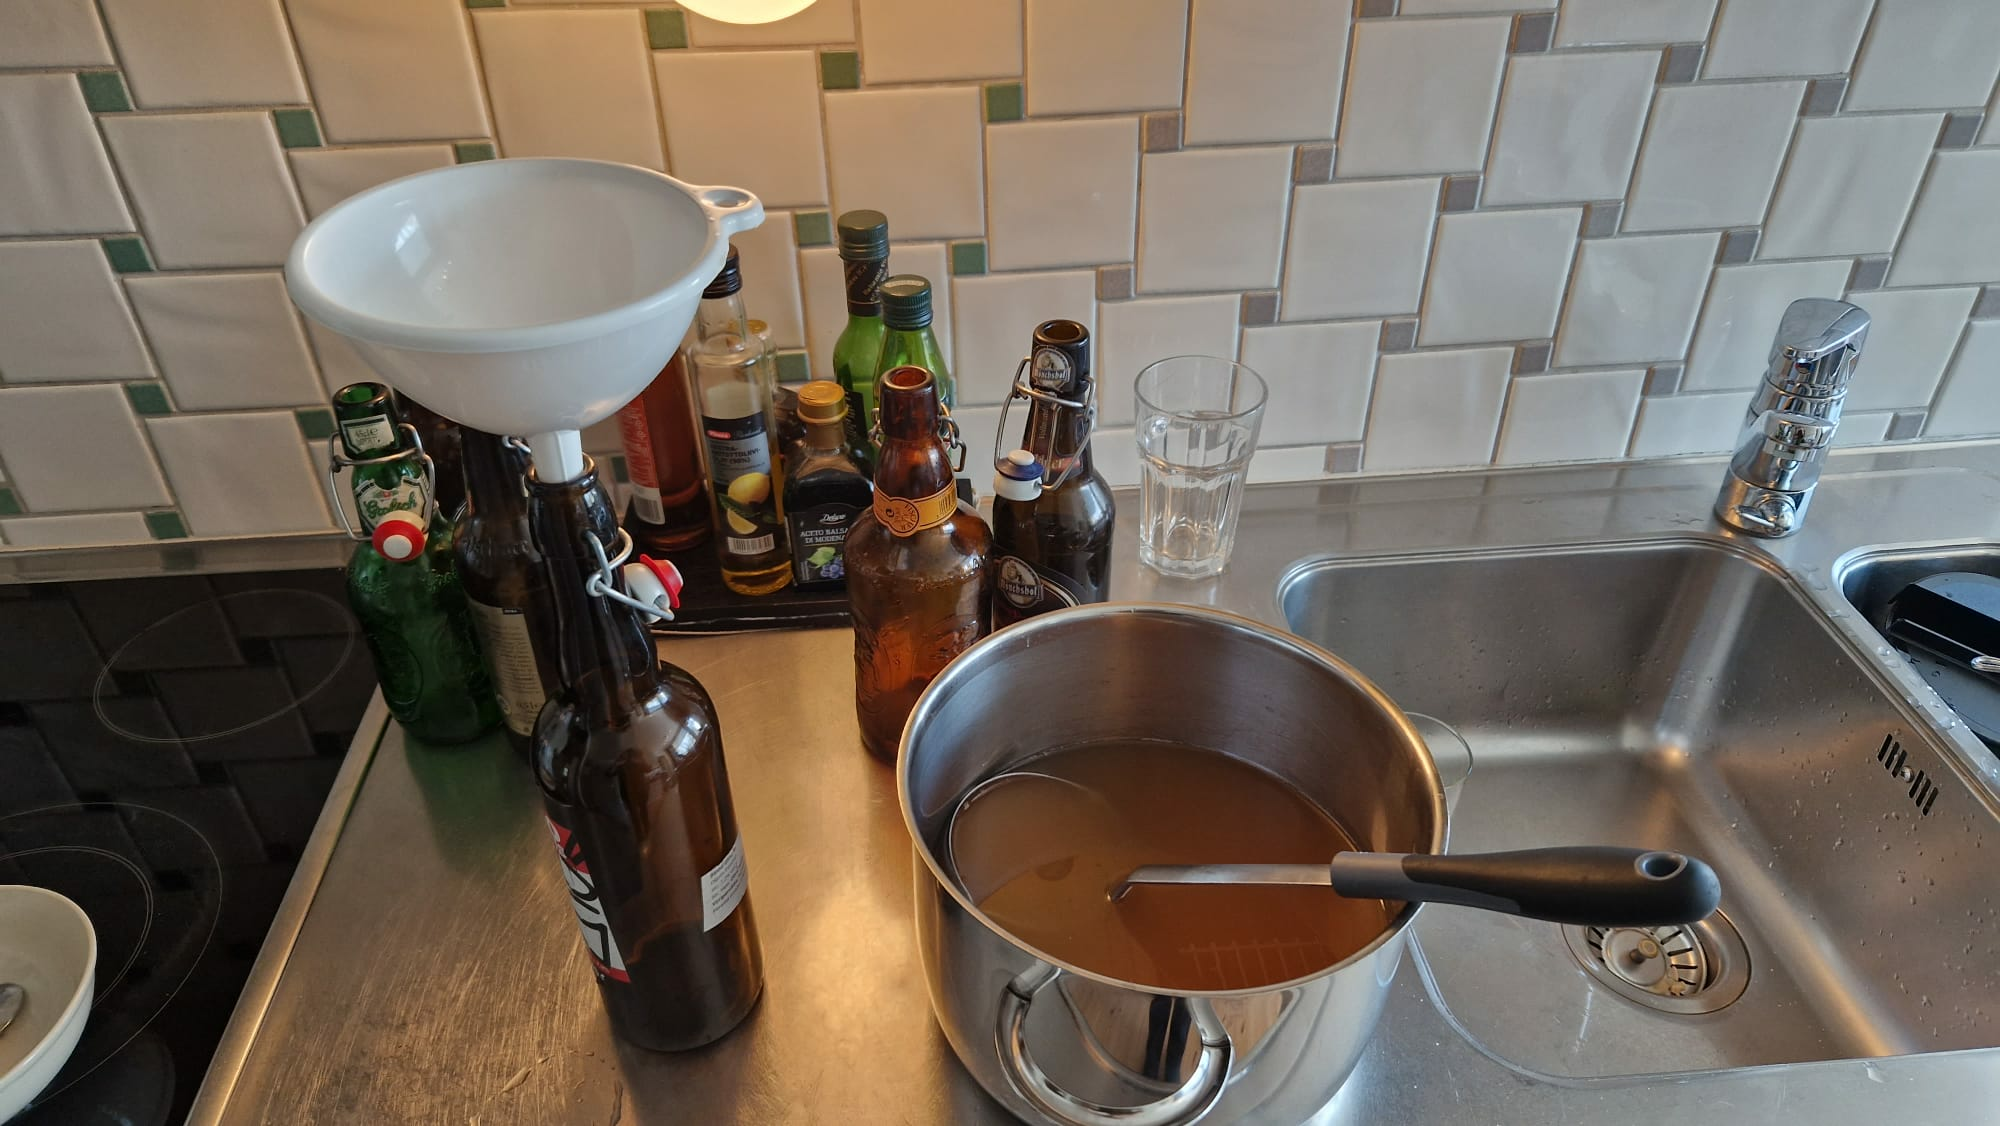 bottling sima on a kitchen counter